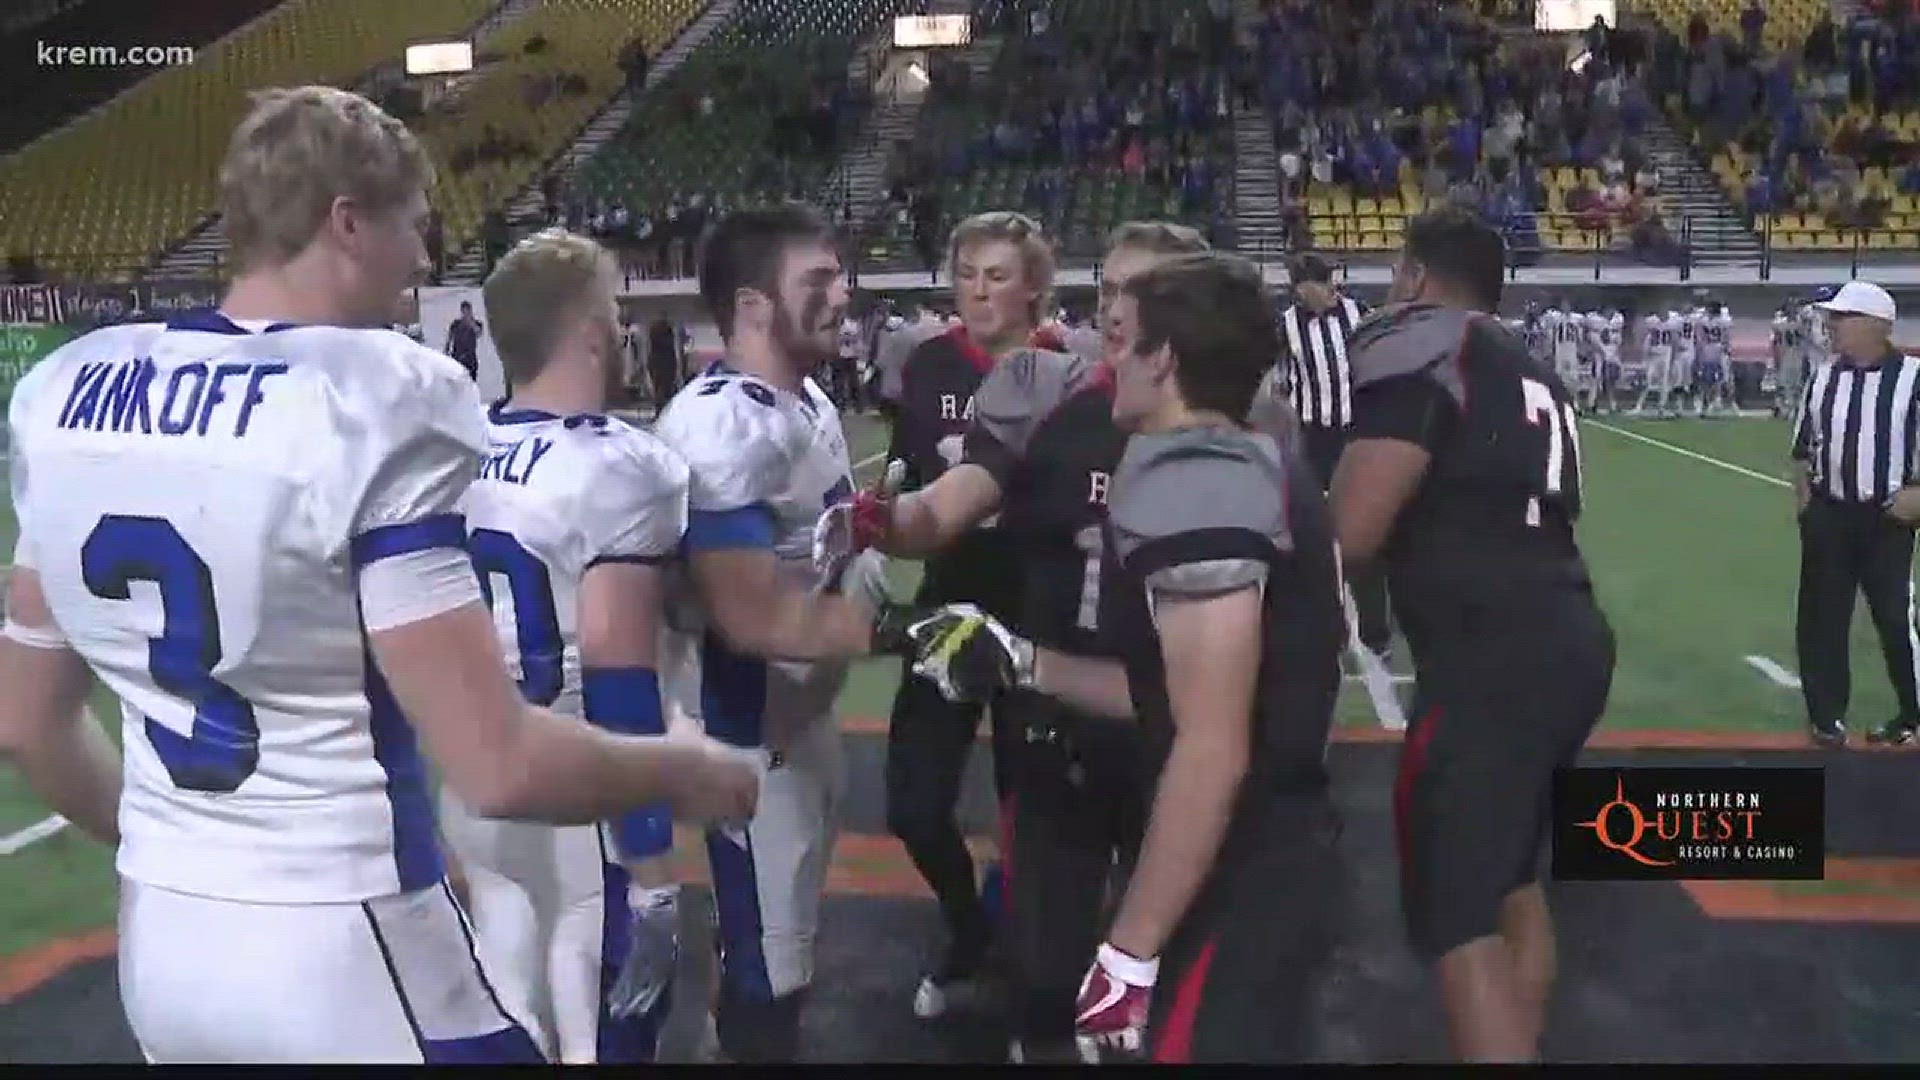 Coeur d'Alene loses in the 5A Championship game, while Prairie wins the 1AD1 championship.